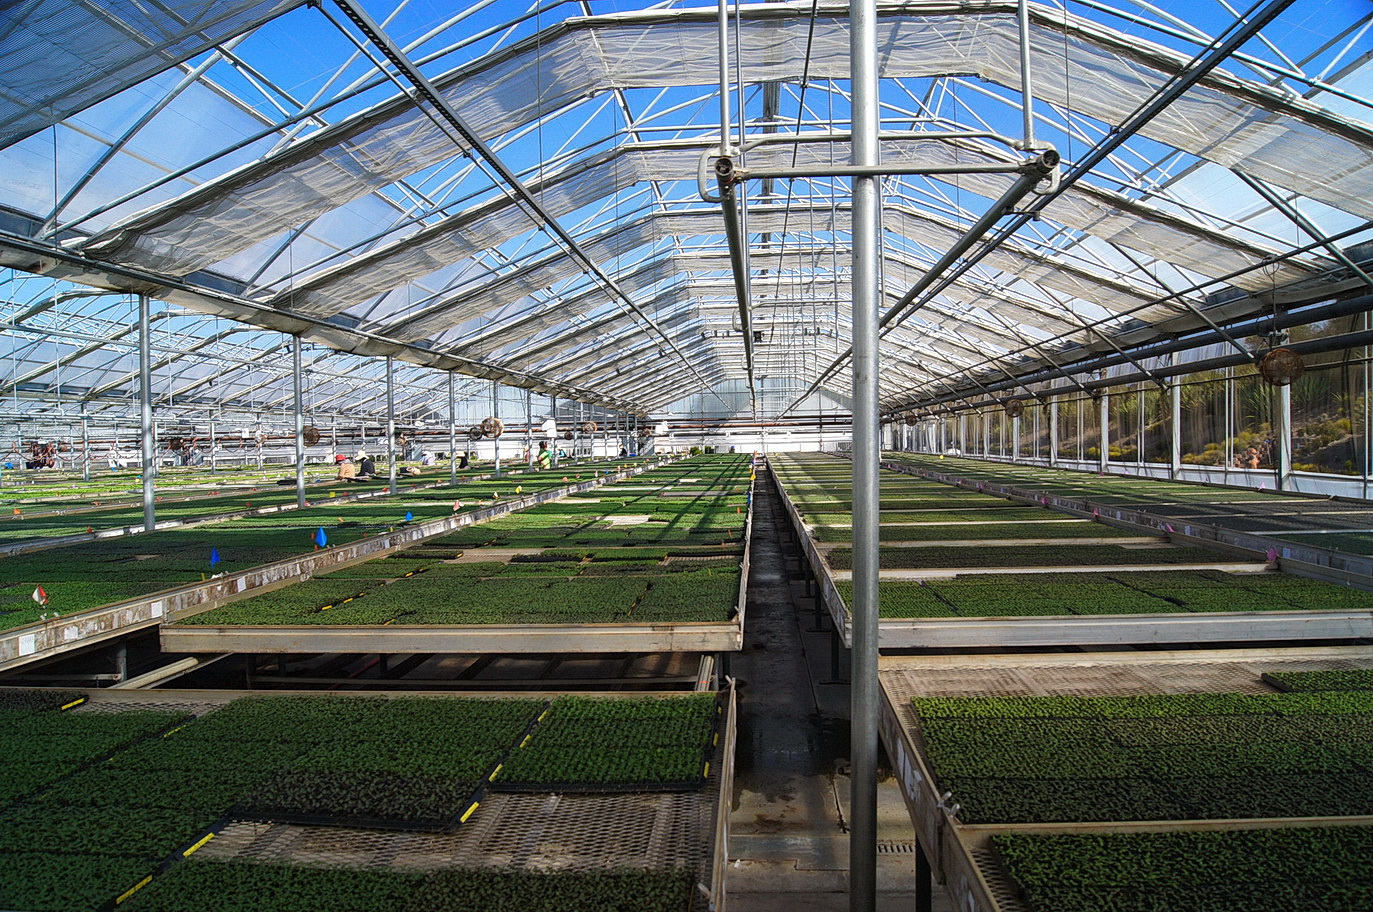 Shade Curtains | Cooling systems | Commercial Greenhouses Equipment